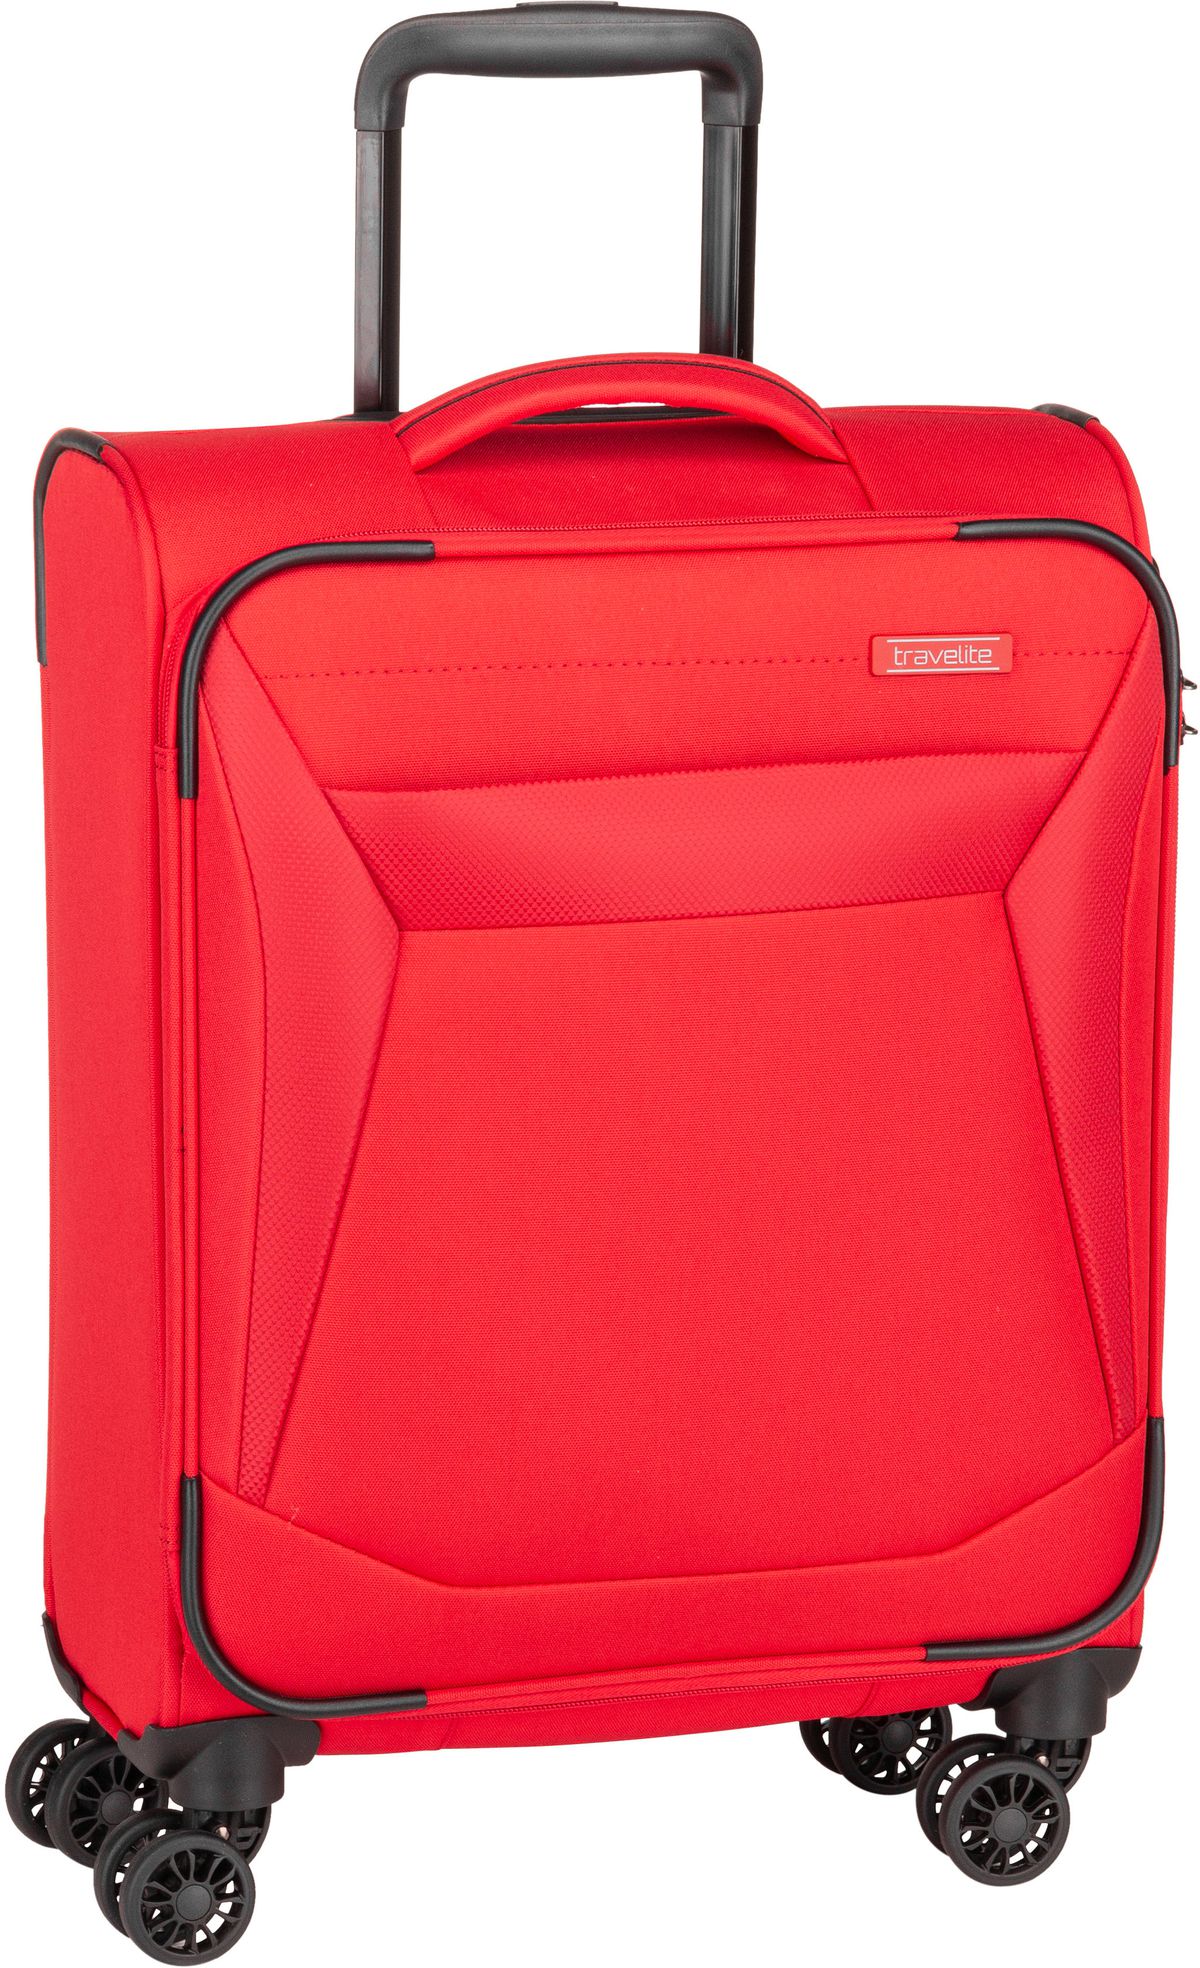 travelite Chios 4w Trolley S  in Rot (34 Liter), Koffer & Trolley